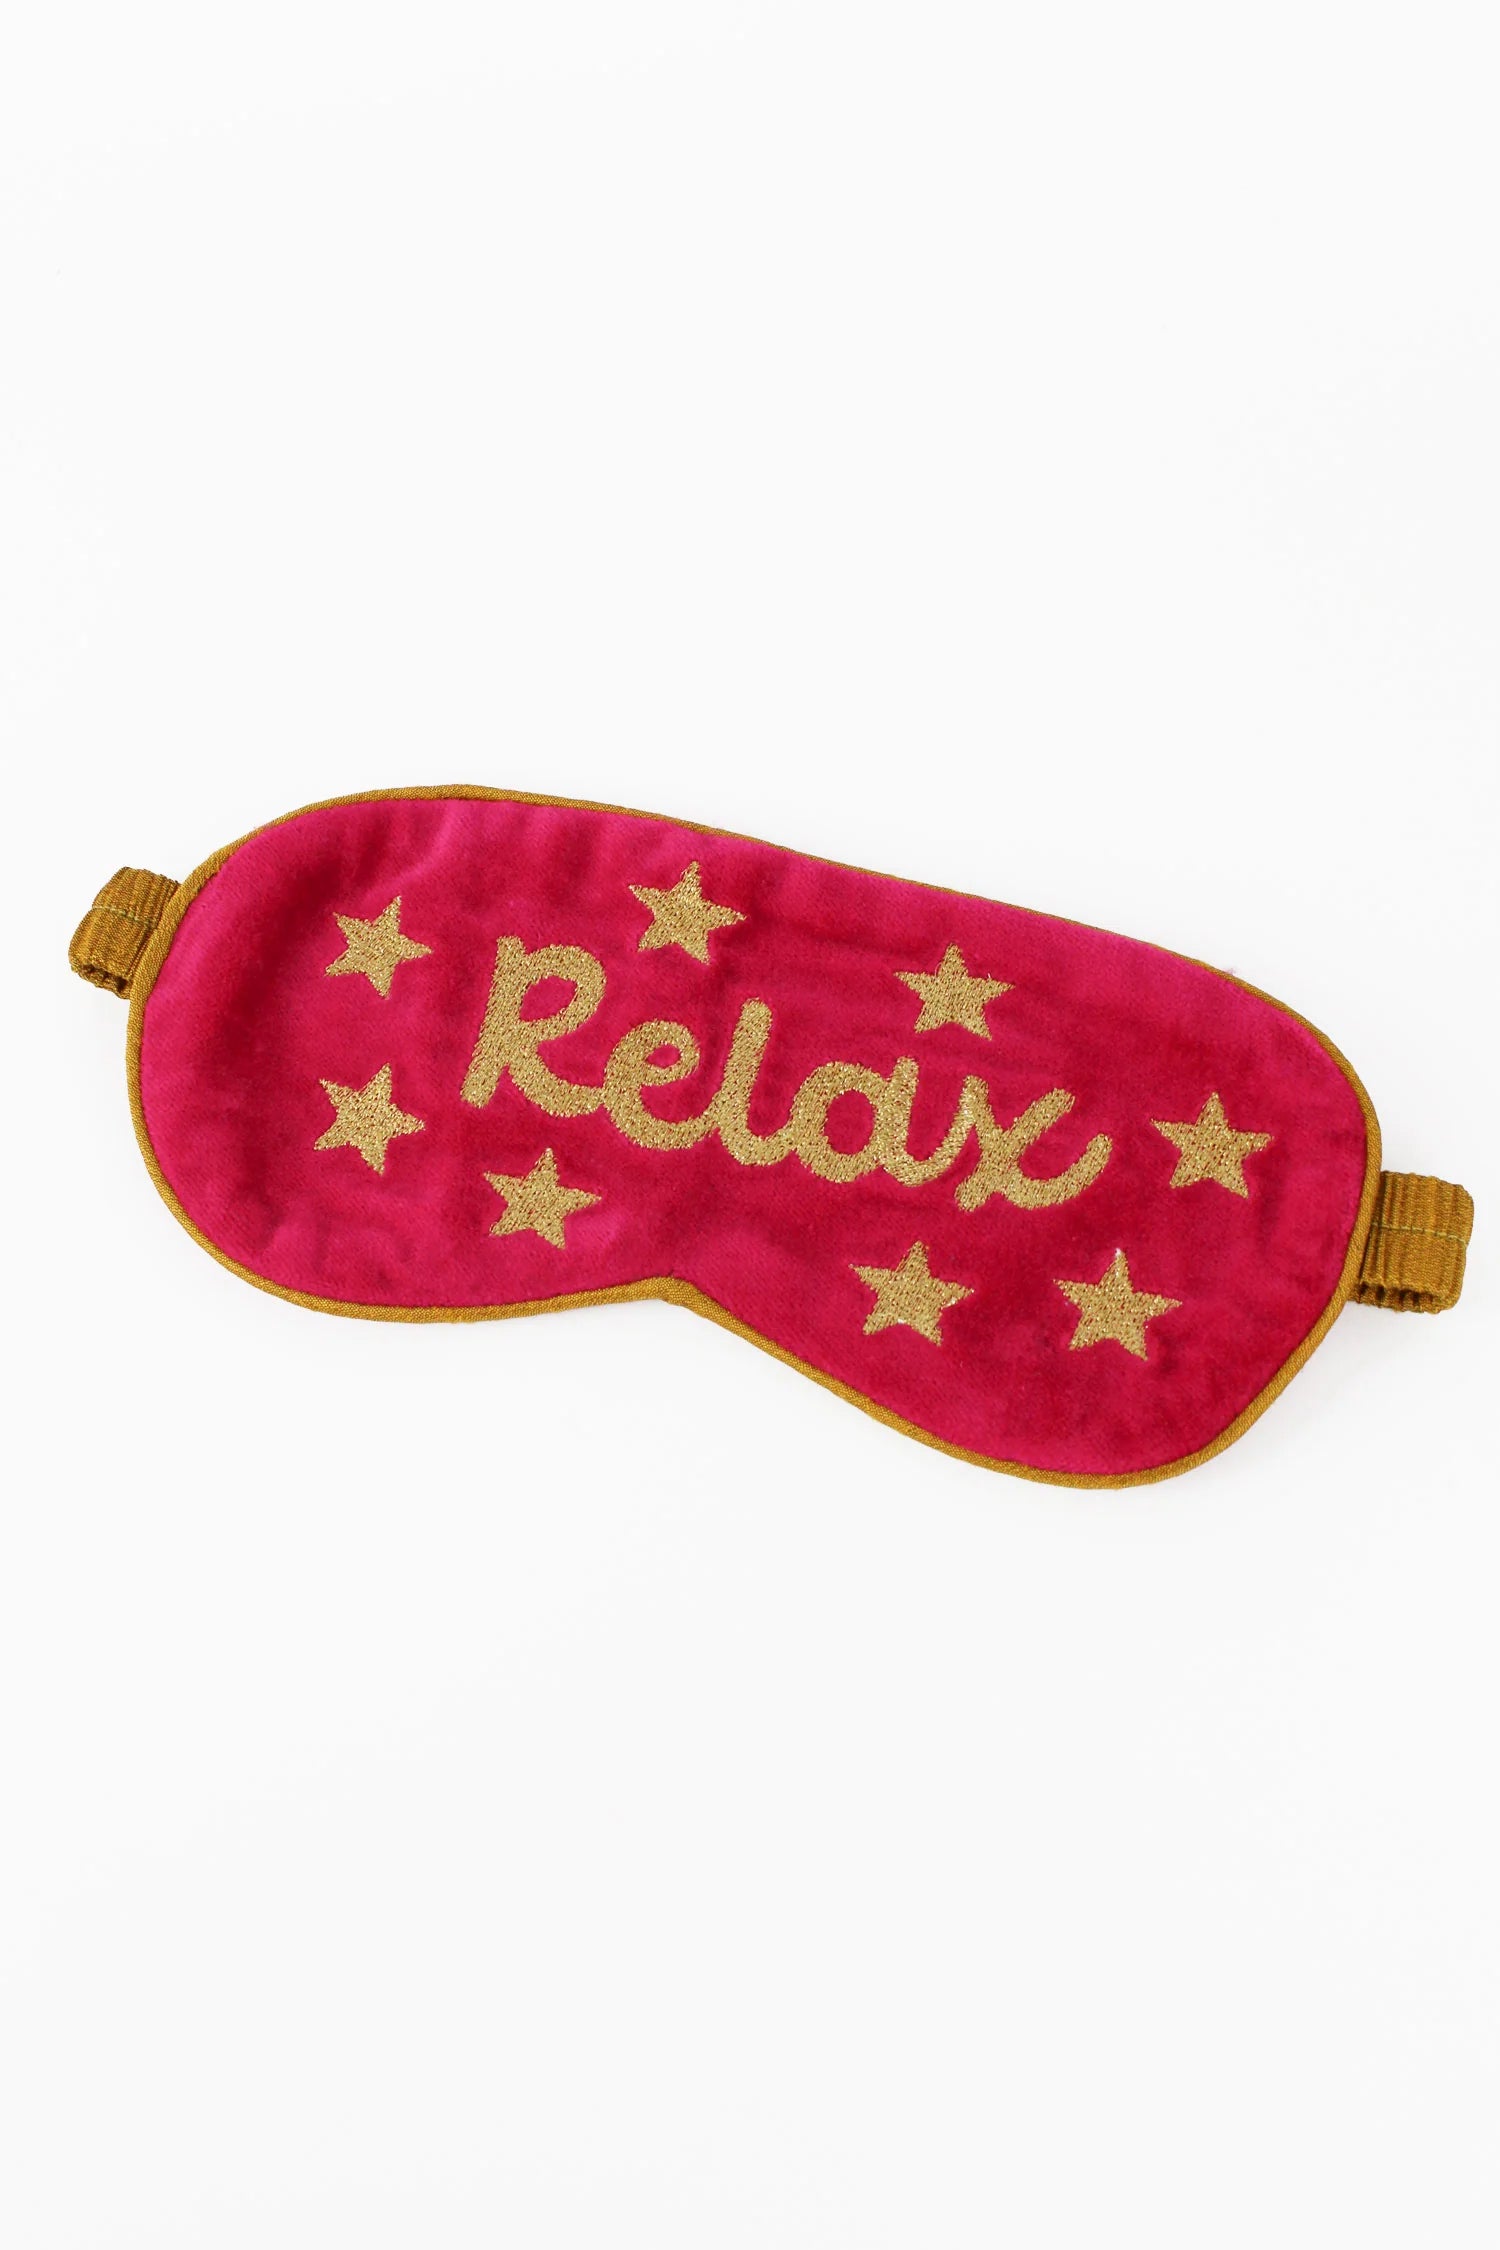 This beautiful 'dreamy' eye mask is embroidered in India using luxury gold thread onto plush pink velvet.